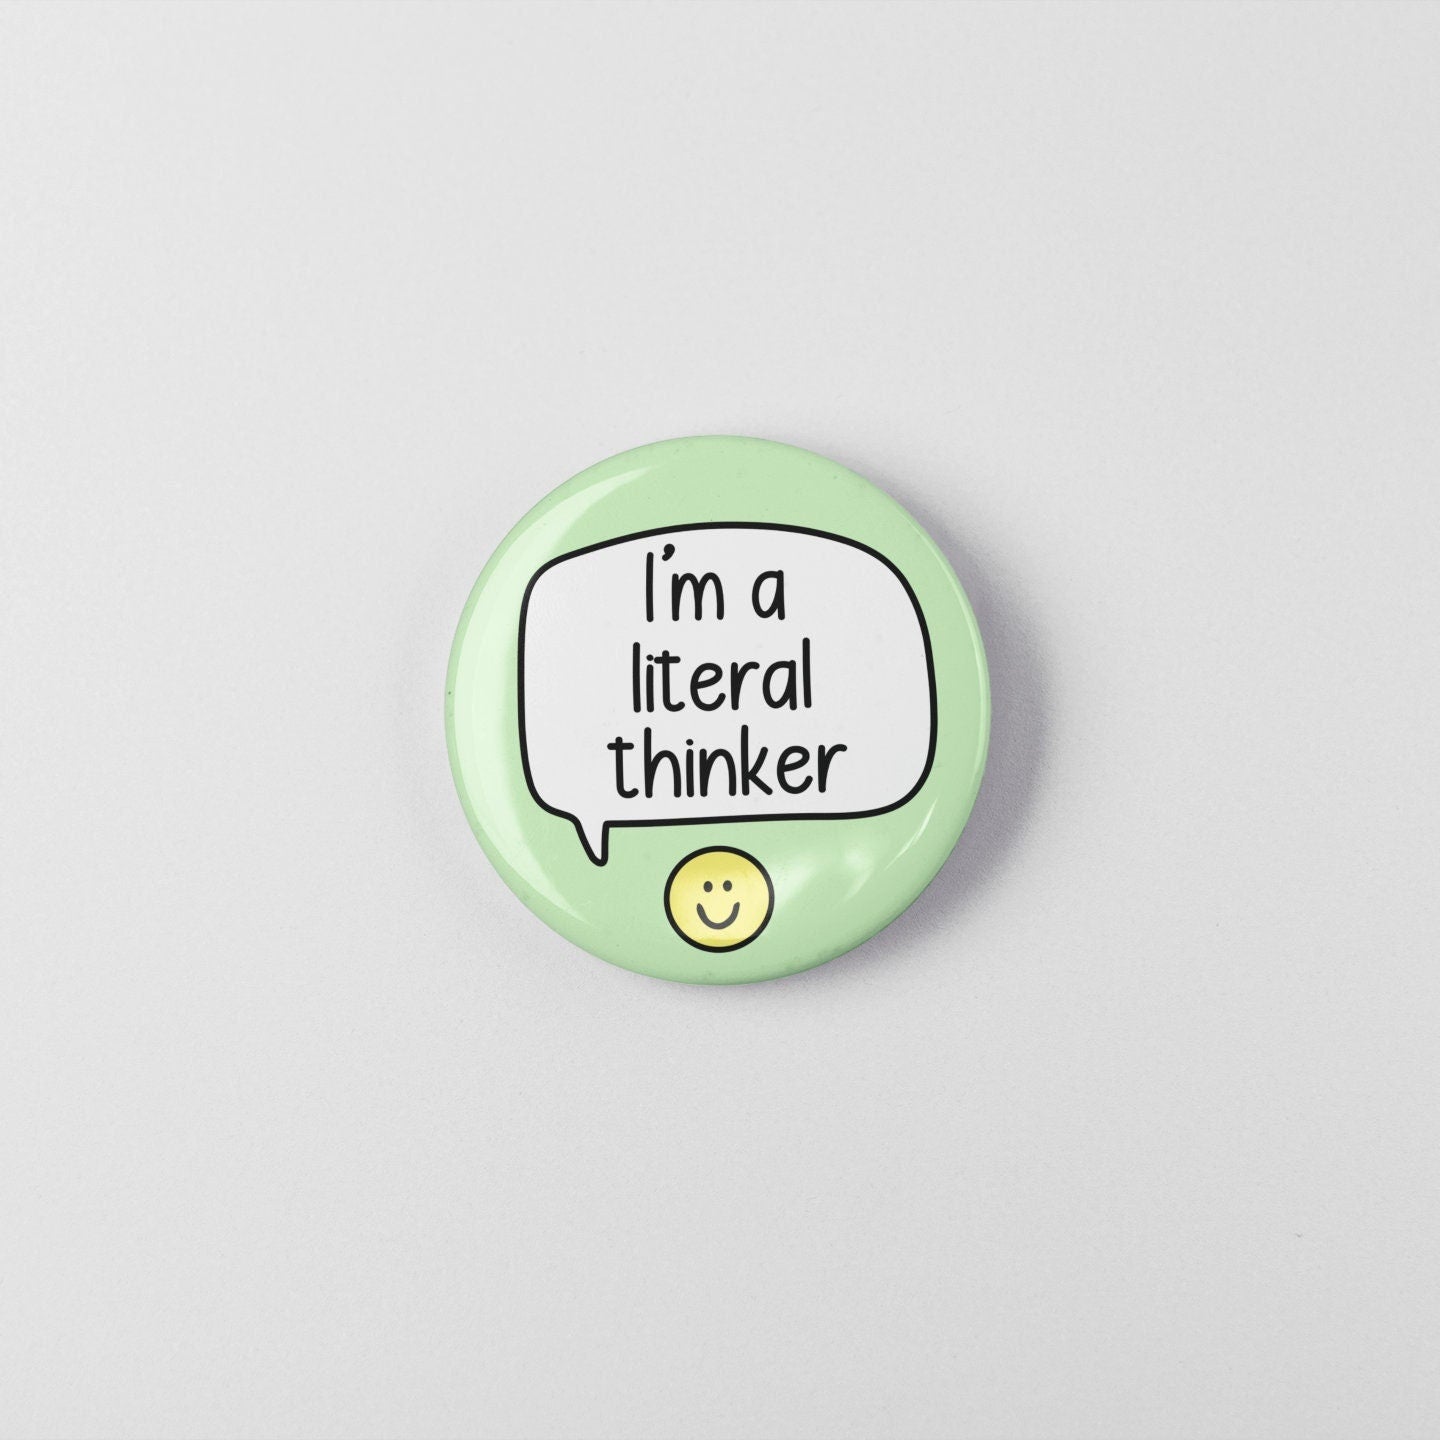 I'm A Literal Thinker - Badge Pin | Neurodivergent Pin - Autism Pins - Autism Awareness - Take things literally